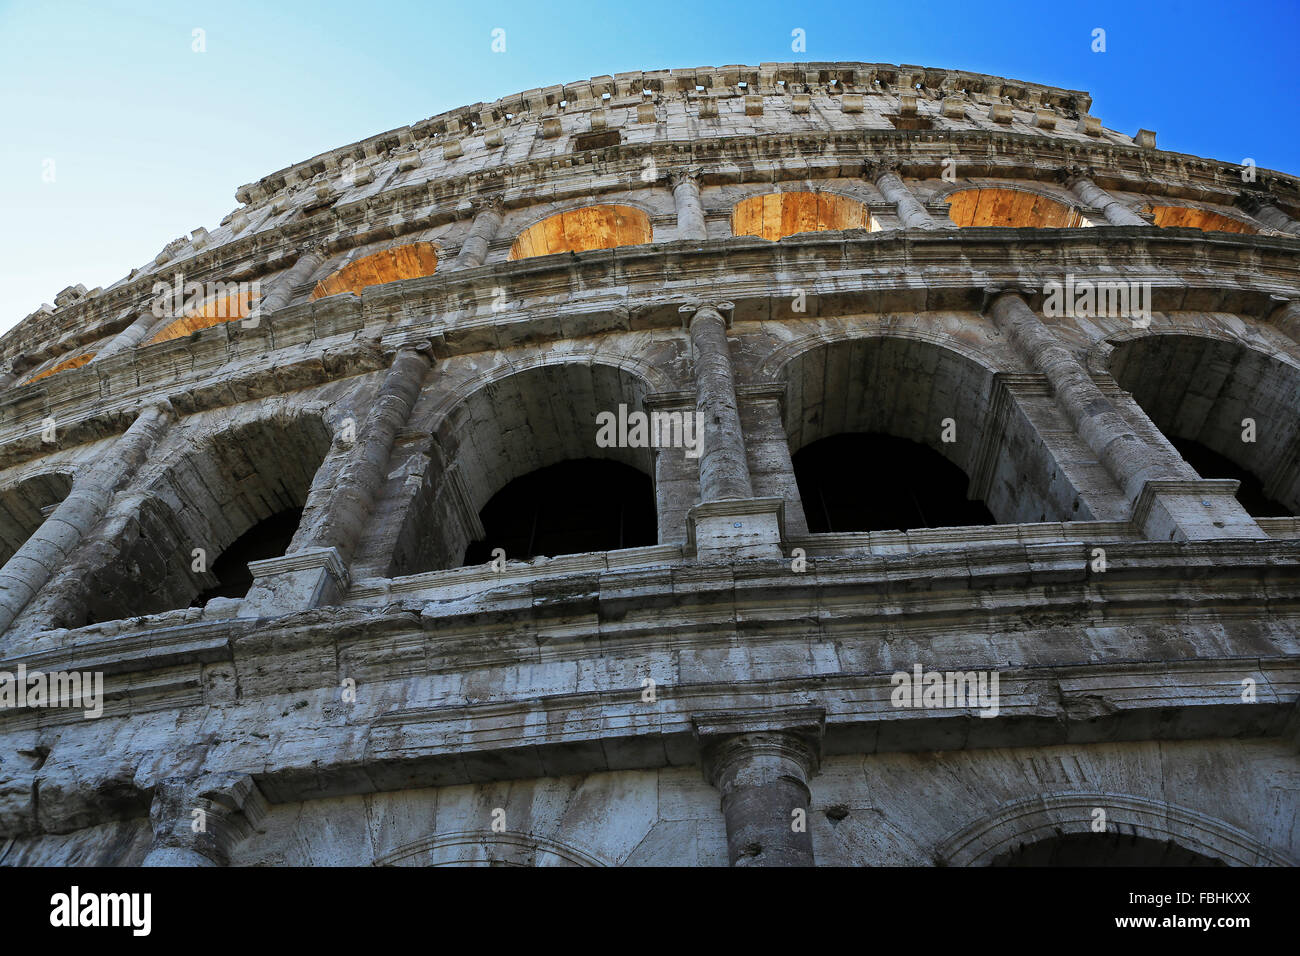 Colosseum by day, Rome, Italy. Stock Photo